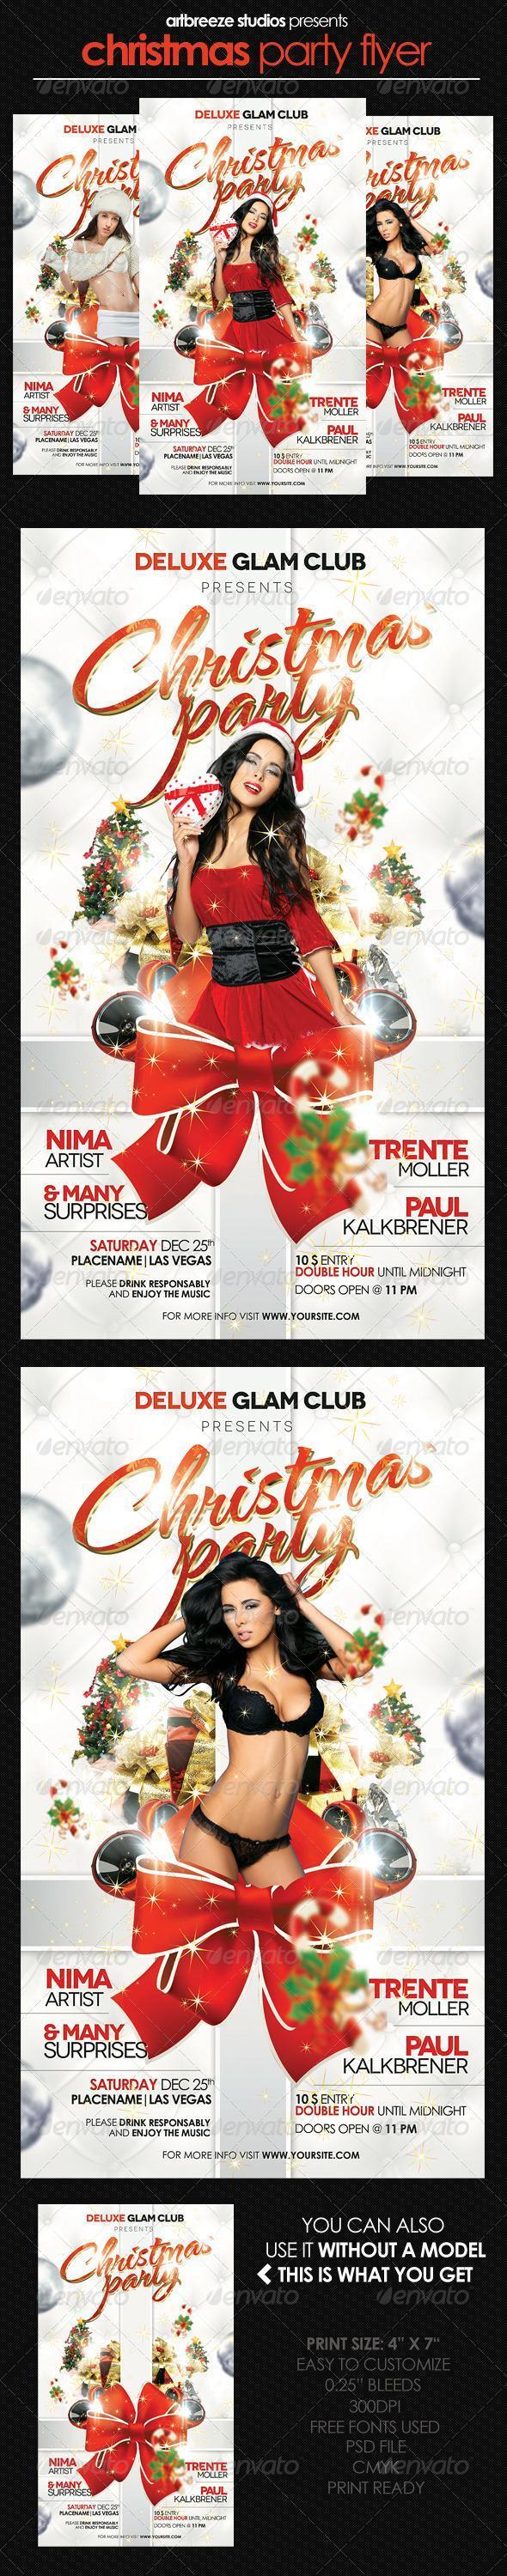 Christmas Party Girls Glam Club Flyer Template